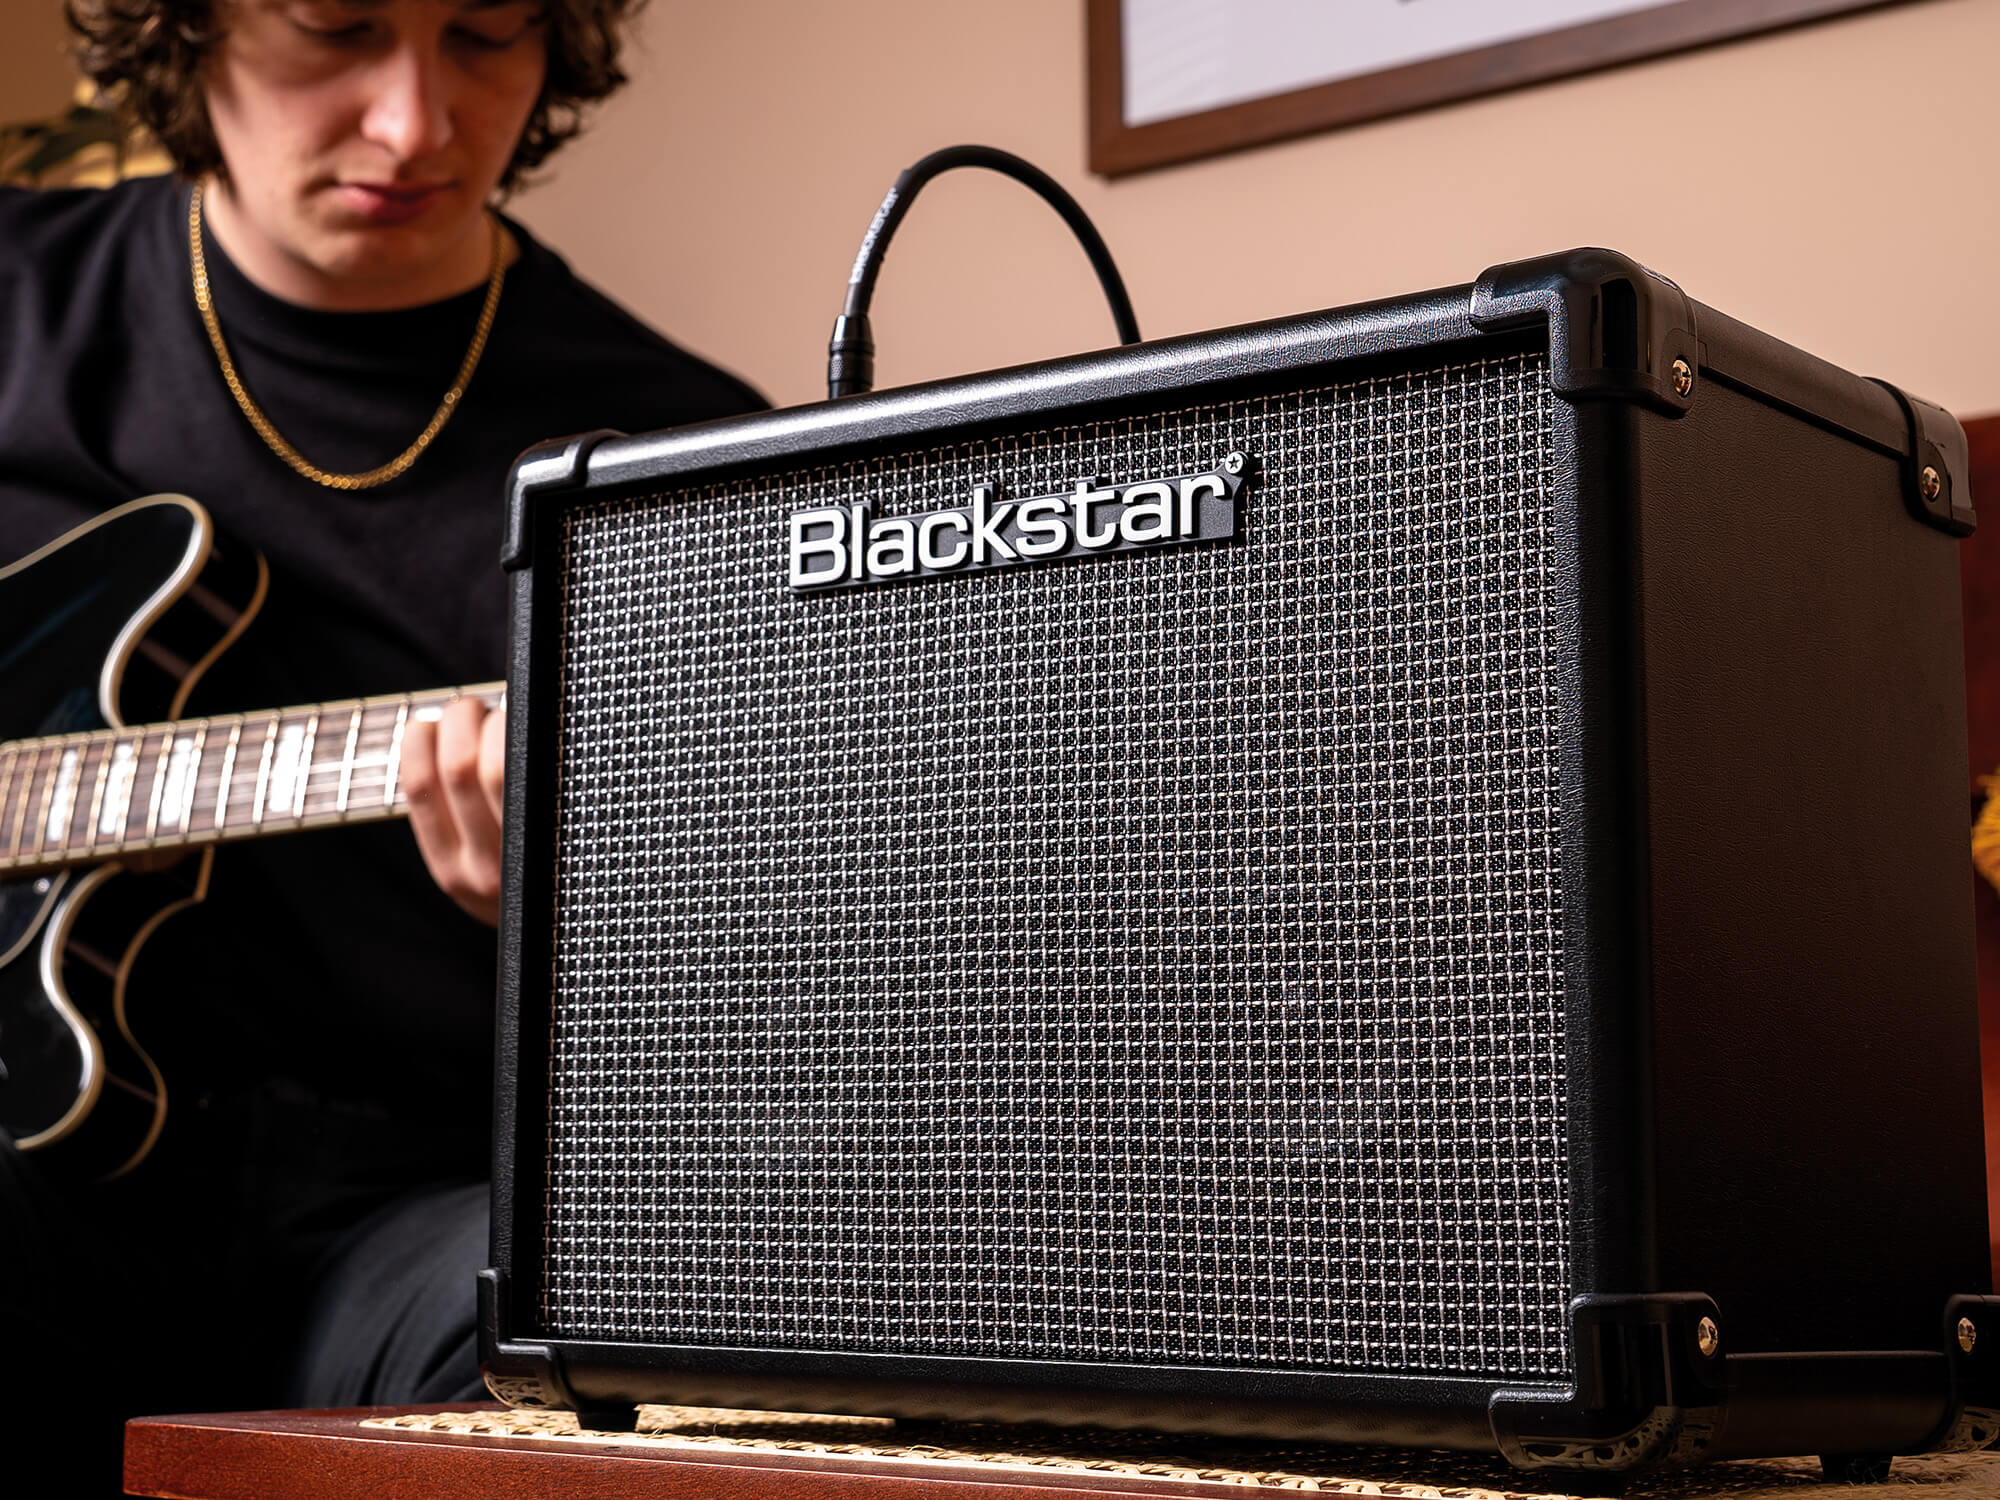 Blackstar ID:CORE V4 amplifier in use. A person is sitting behind the amp and is playing guitar. The amplifier is black all over, small in size, and features the Blackstar logo on the grille.